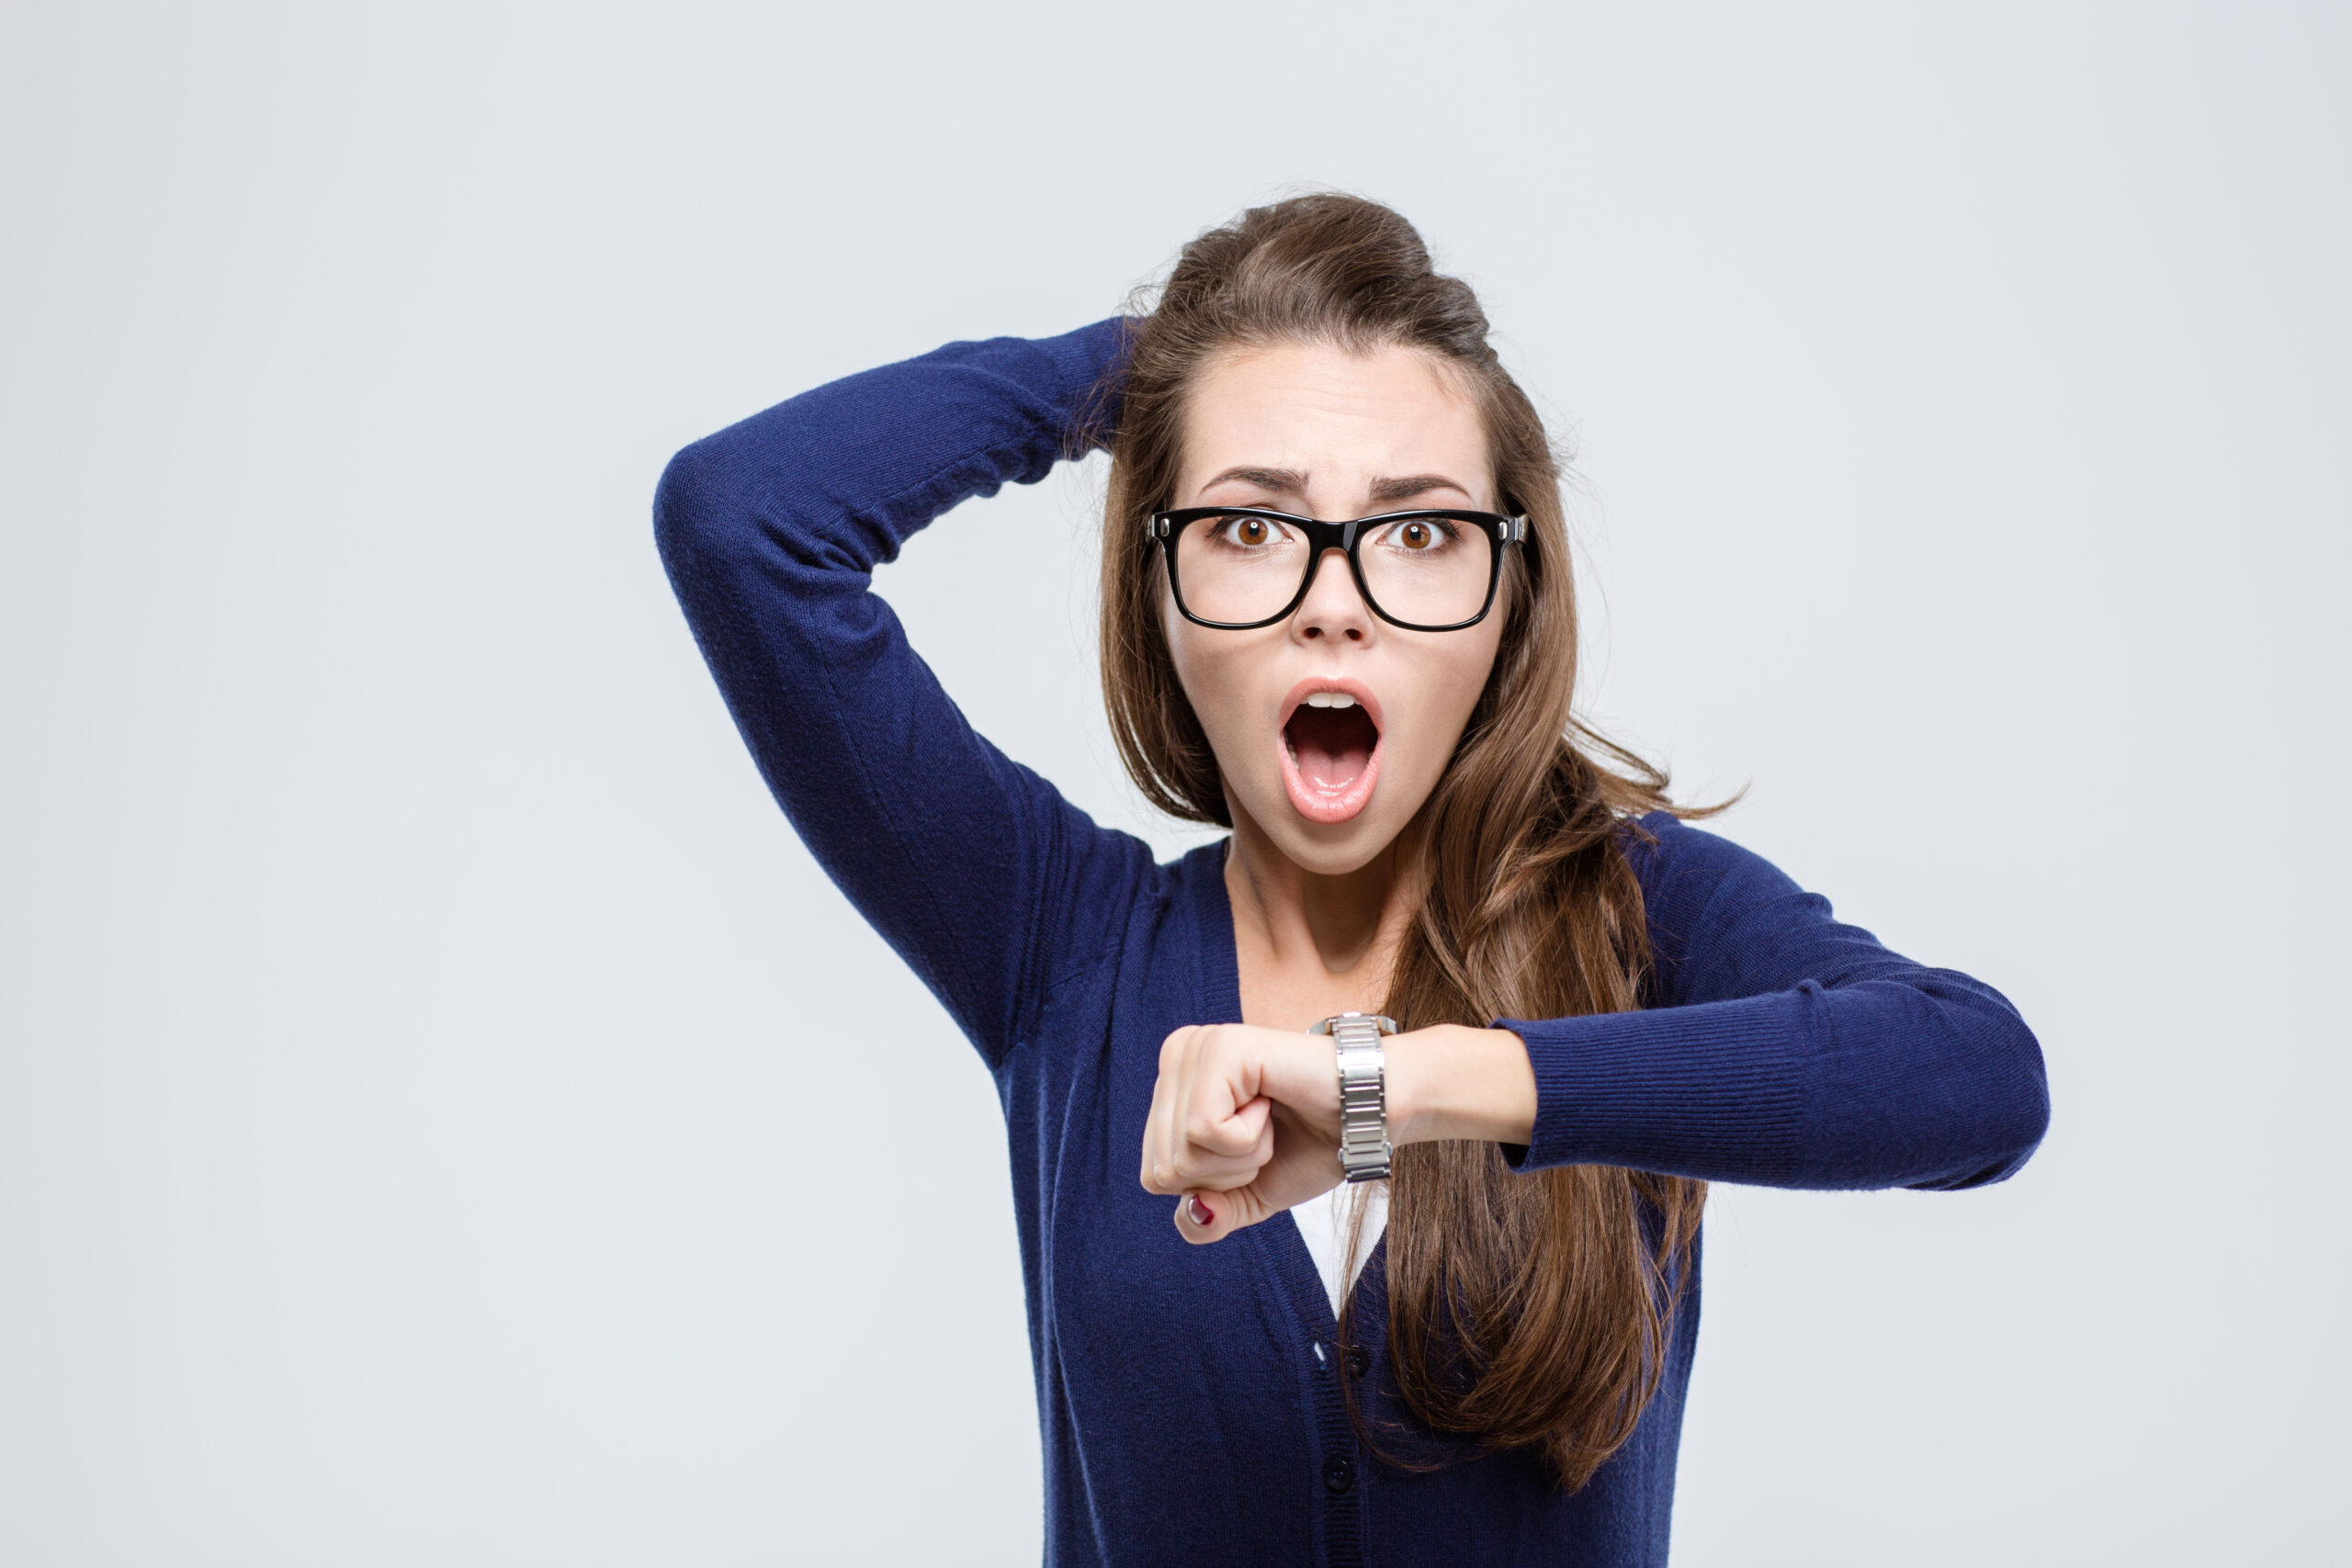 Portrait,Of,Shocked,Young,Woman,Holding,Hand,With,Wrist,Watch